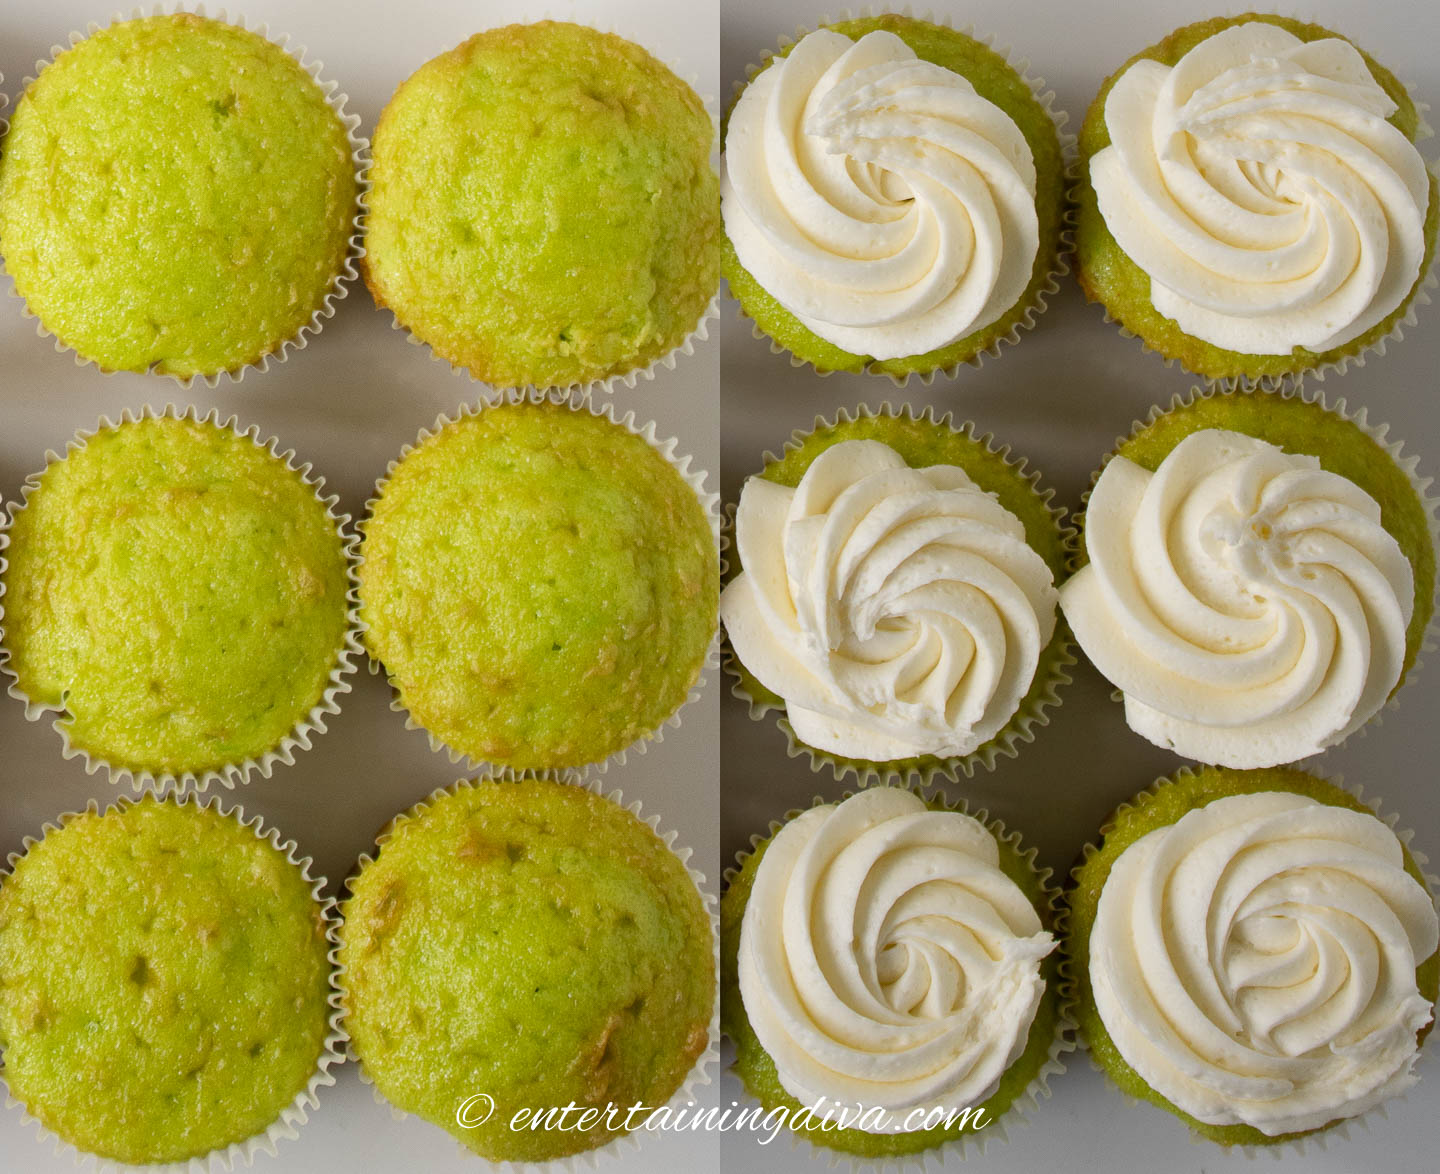 Plain cupcakes and cupcakes with white frosting